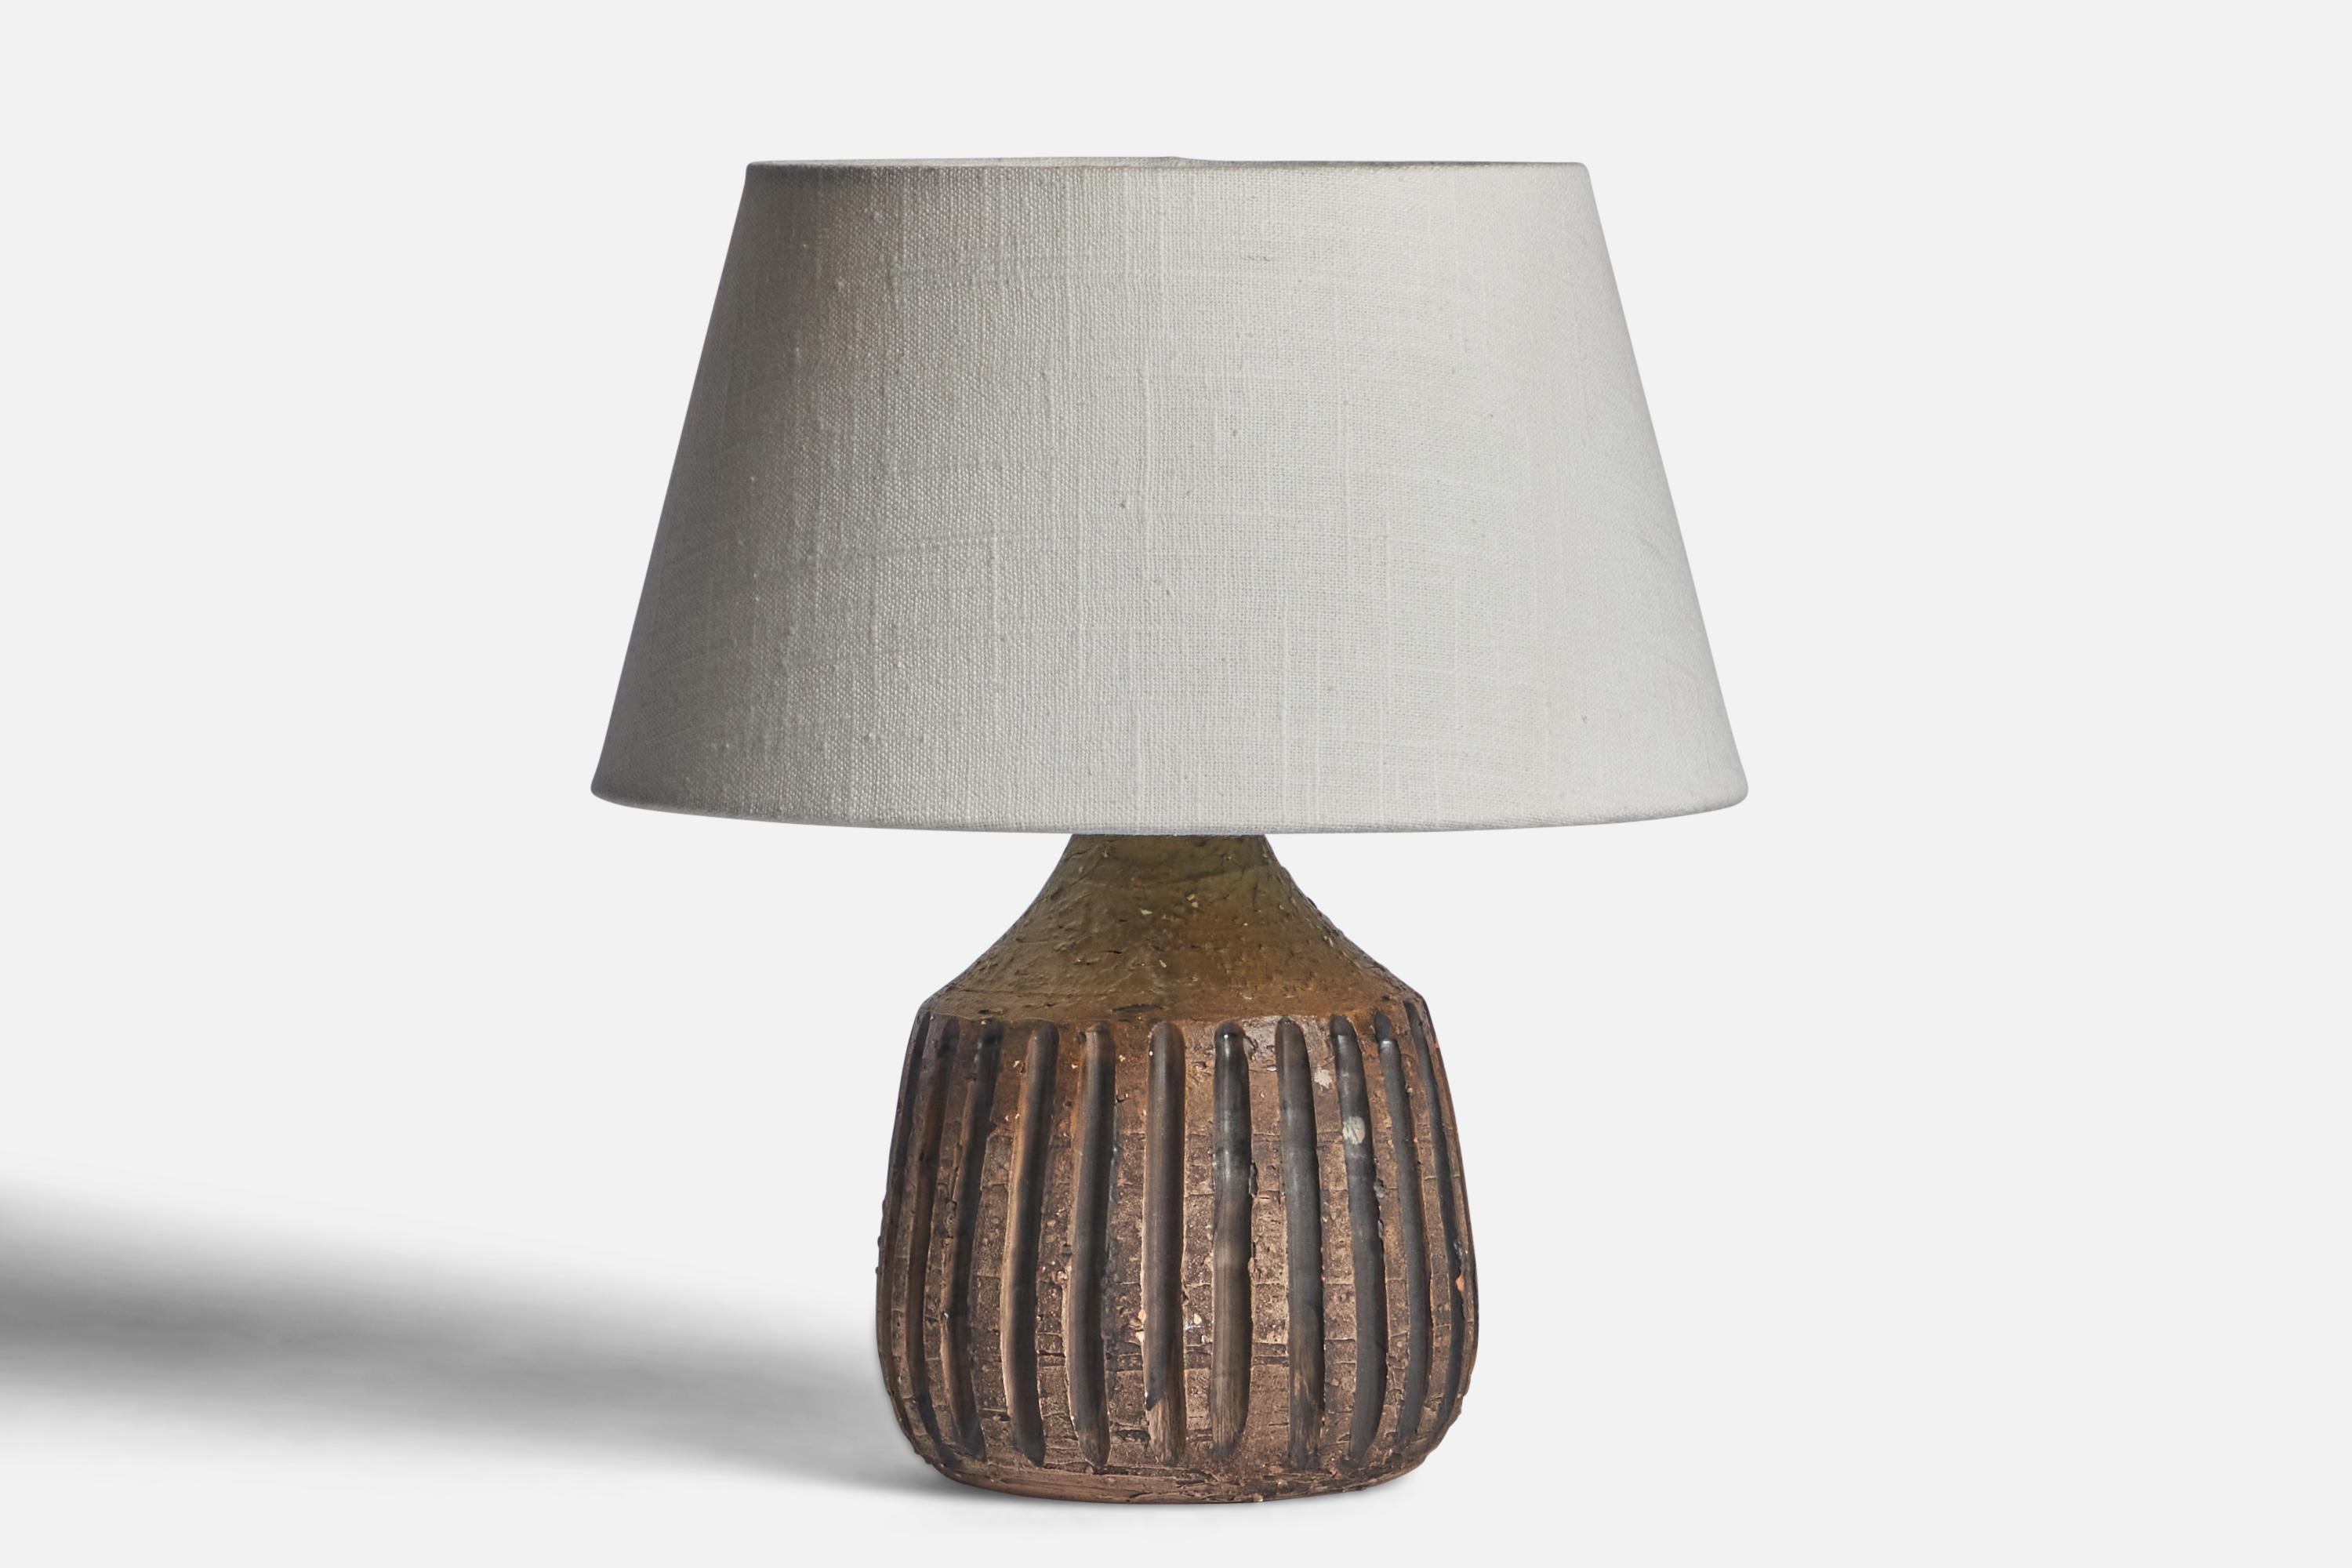 A fluted brown-glazed stoneware table lamp designed and produced in Sweden, c. 1960s.

Dimensions of Lamp (inches): 8.5” H x 5.25” Diameter
Dimensions of Shade (inches): 7” Top Diameter x 10” Bottom Diameter x 5.5” H 
Dimensions of Lamp with Shade